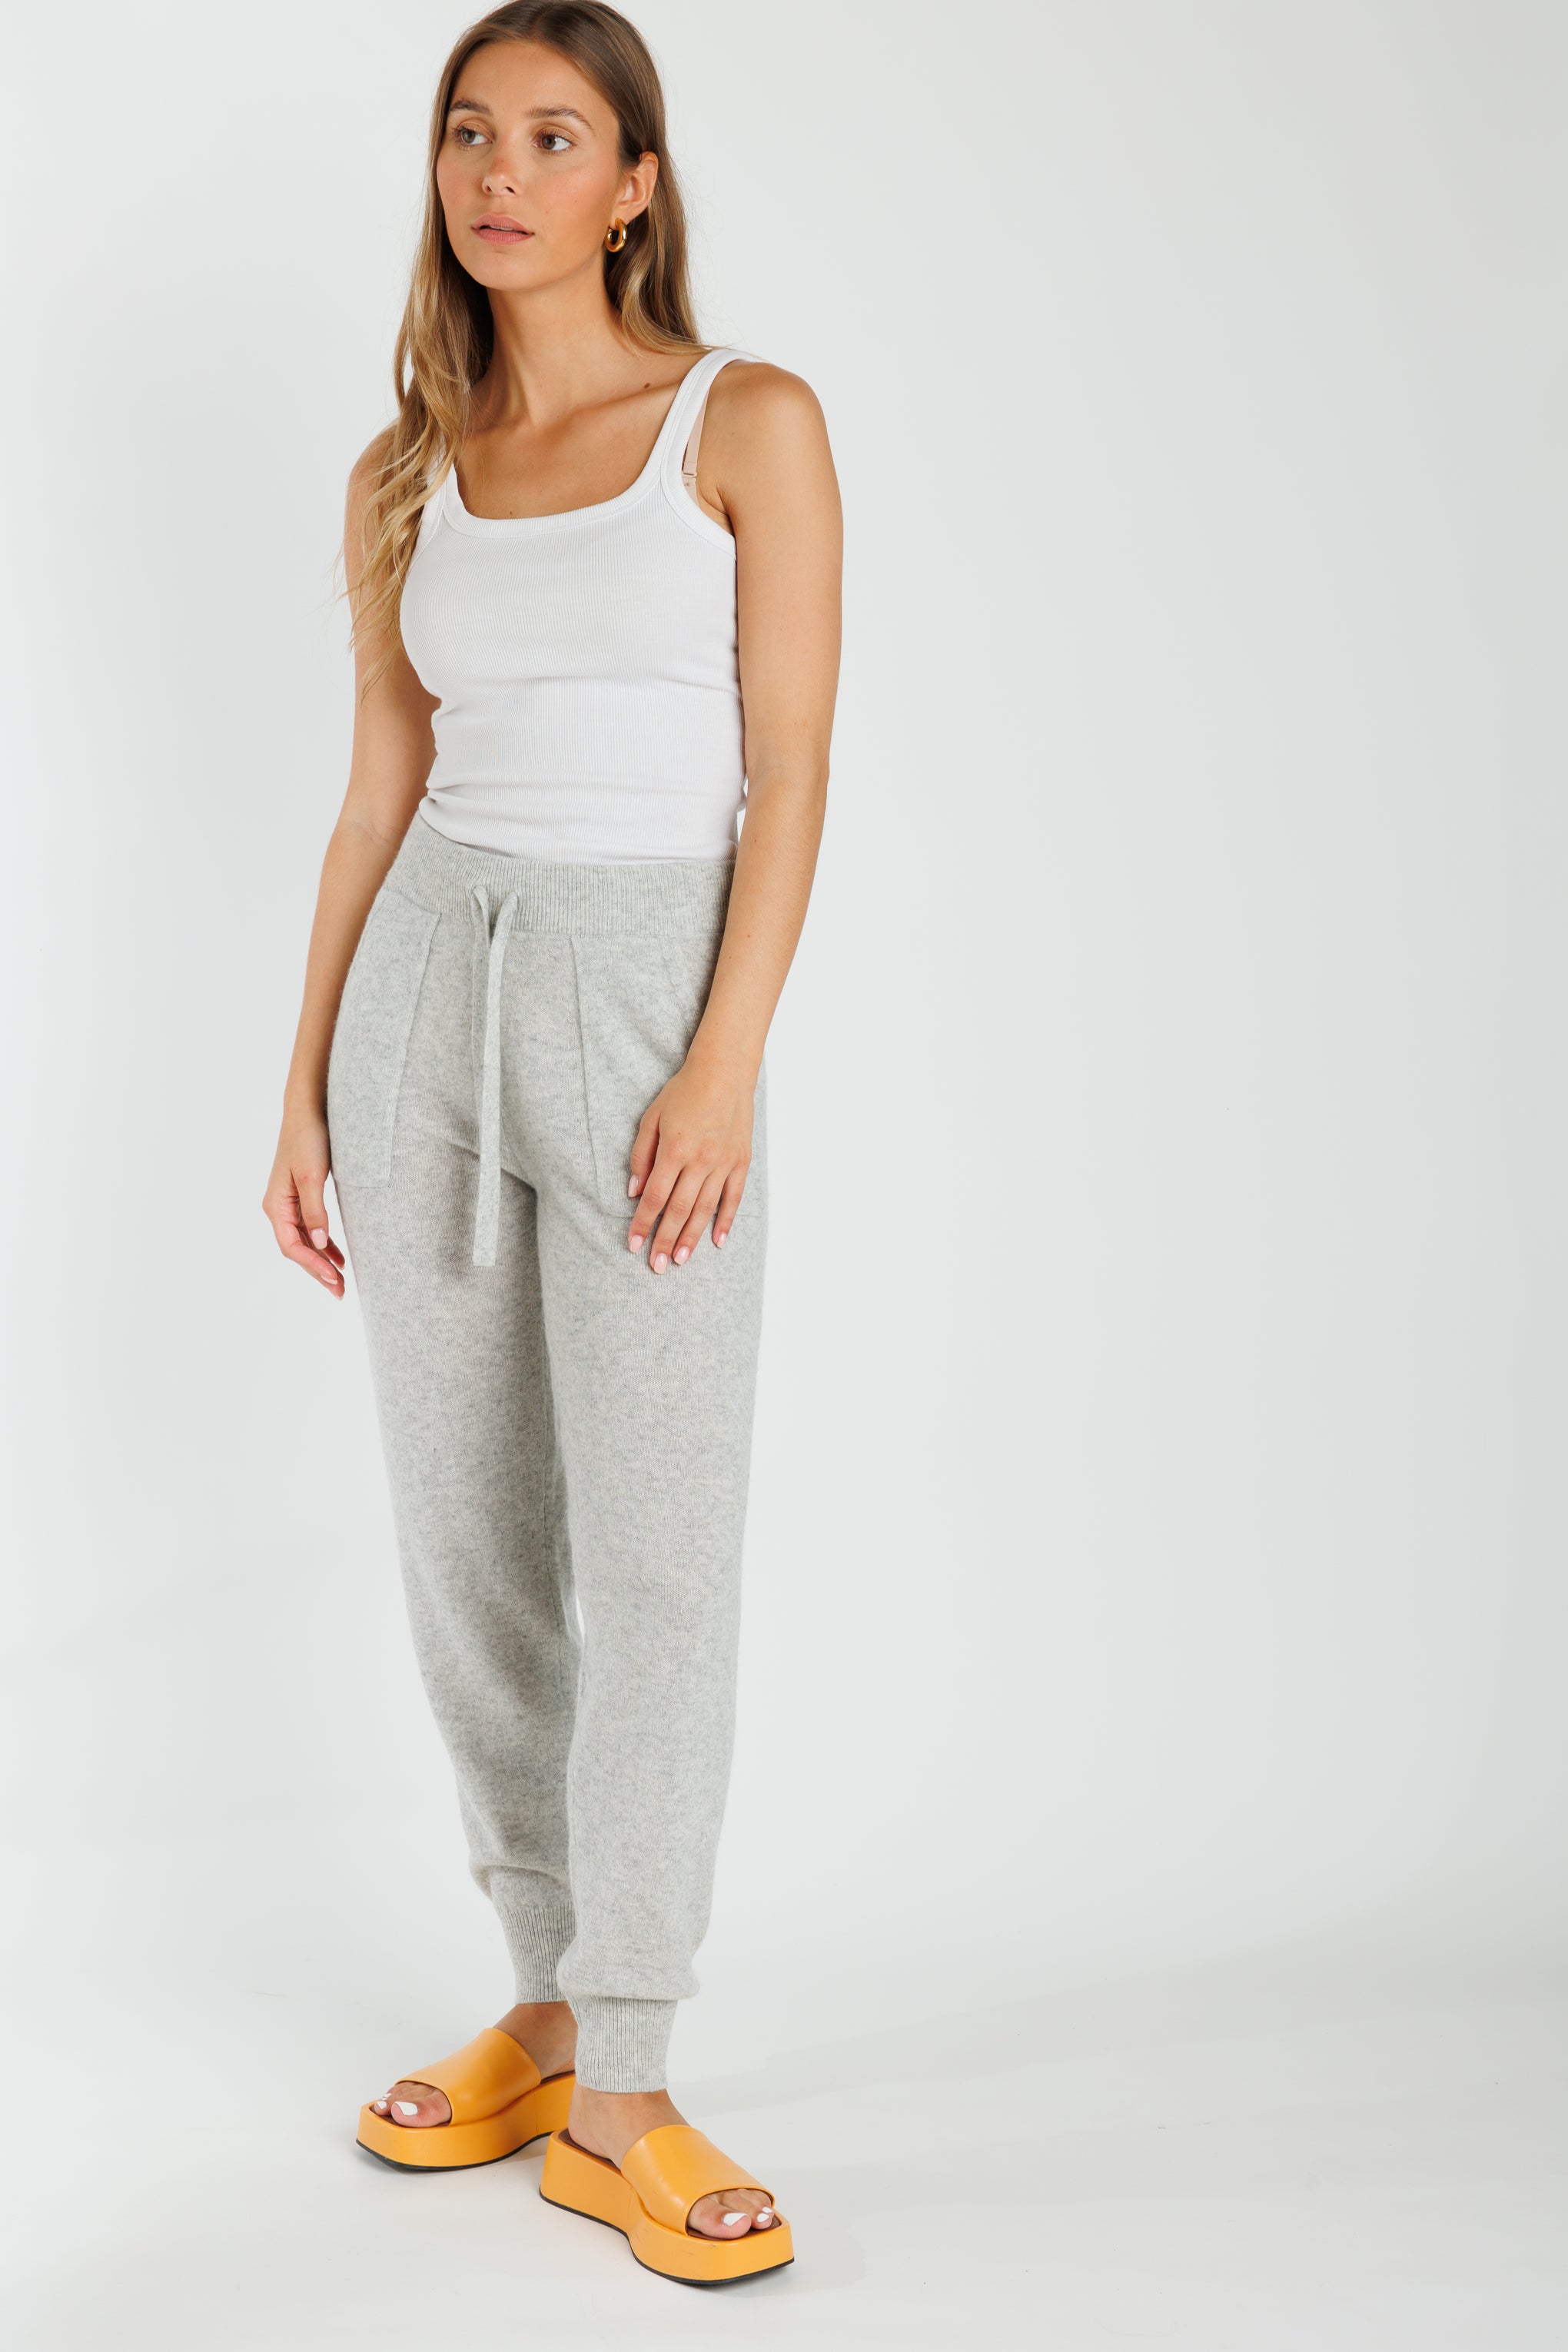 Crush Cashmere Faro Chill Joggers in Fluffy Grey available at TNT The New Trend Australia.